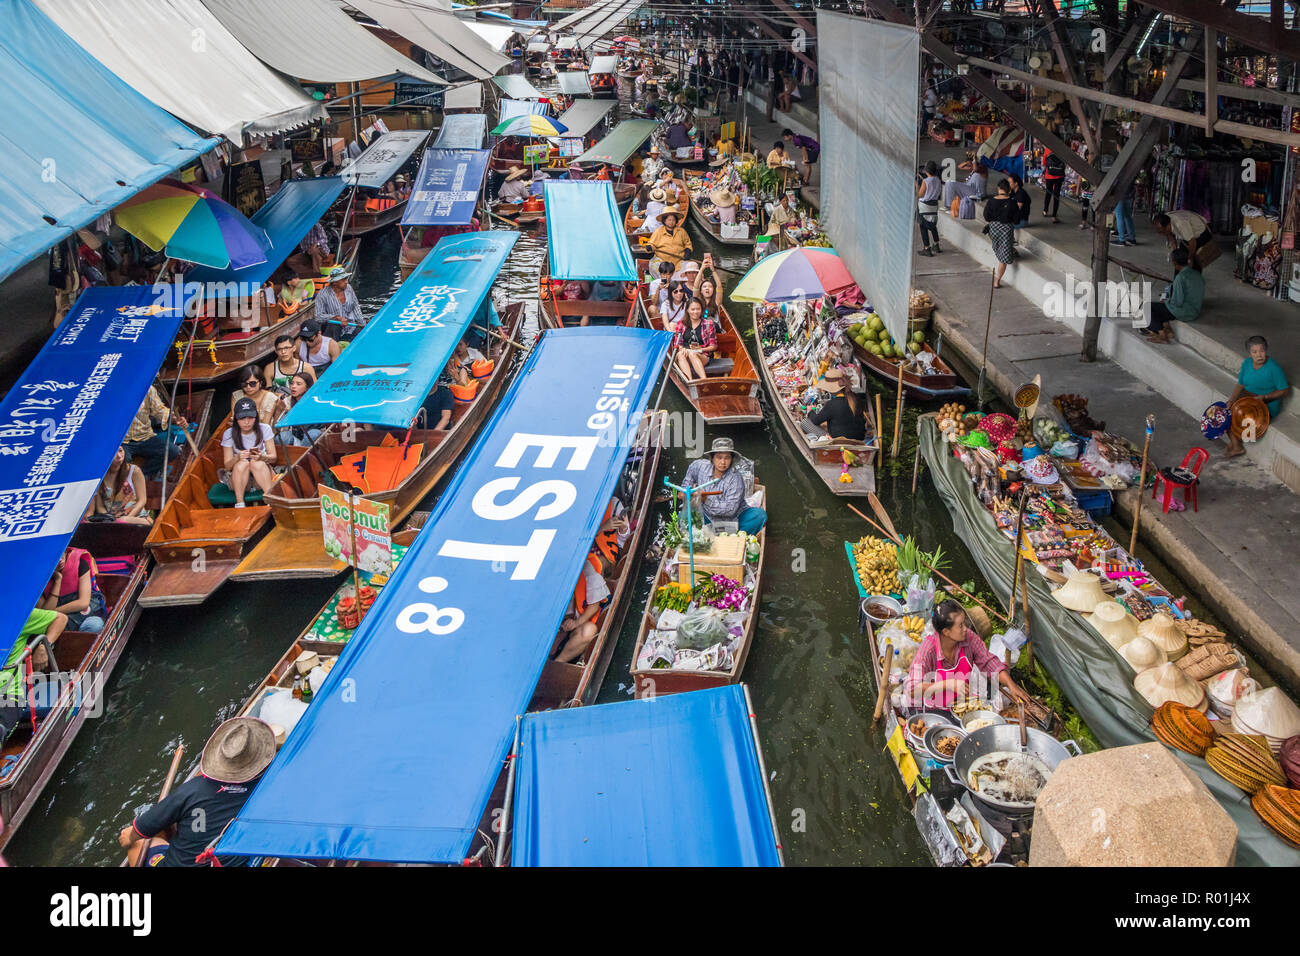 Damnoen Saduak, Thailand - 8th October 2018: Vendors and trip boats at the floating market. The market is a very poular tourist destination. Stock Photo